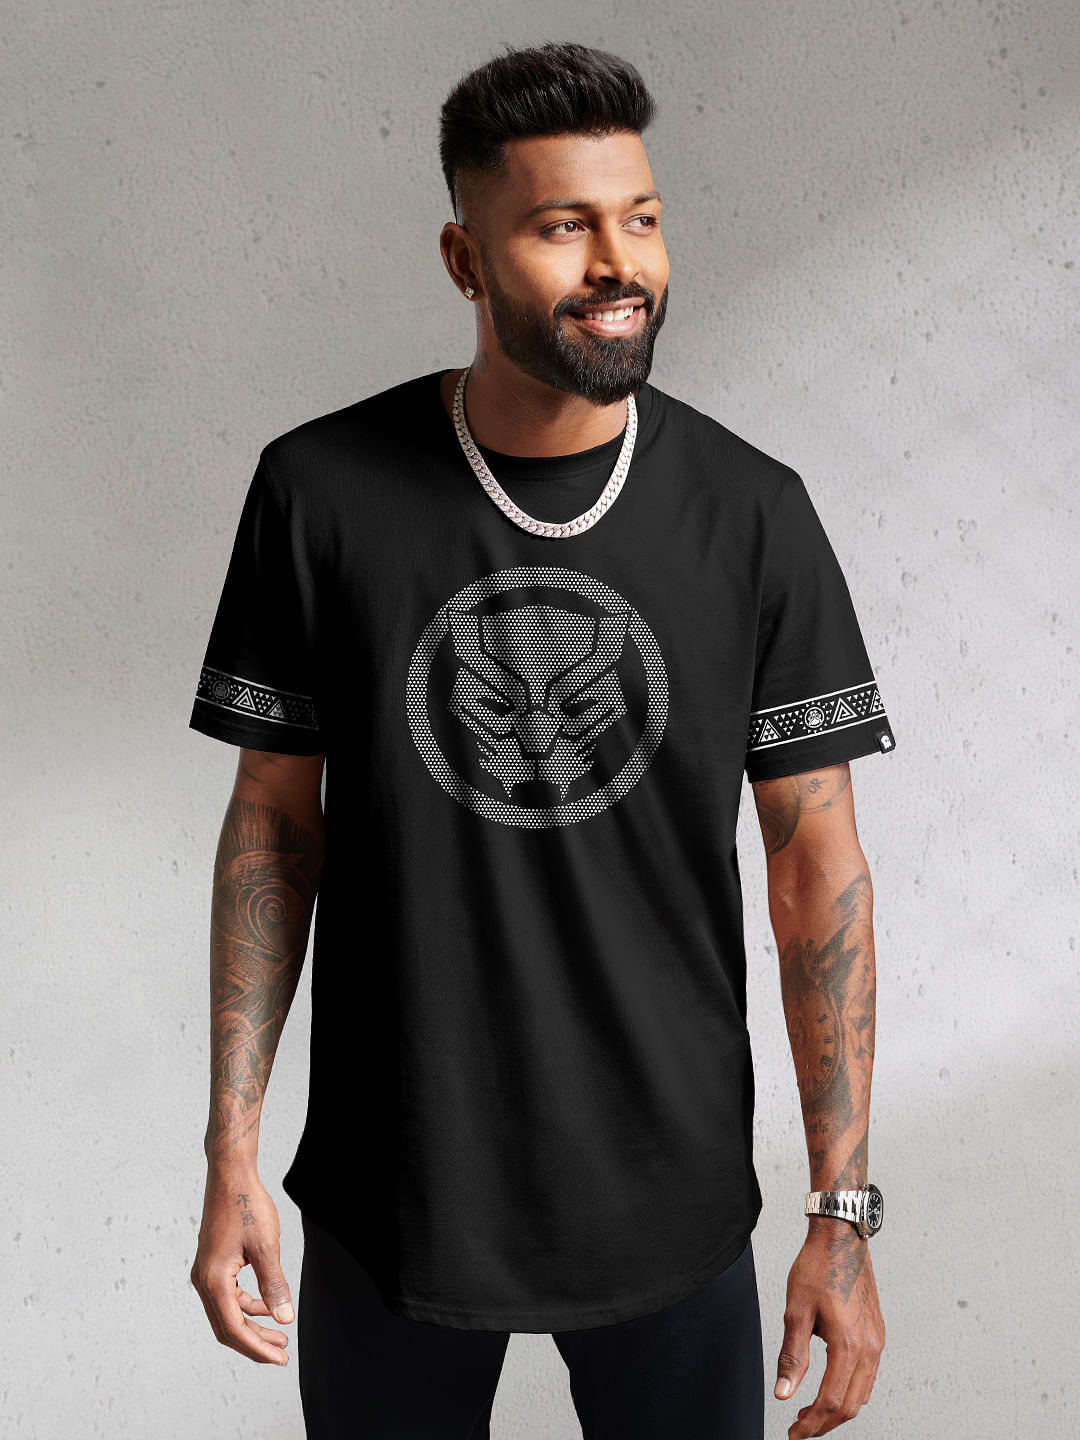 Buy Black Panther: Loyalty Drop Cut T-shirts online at The Souled Store.